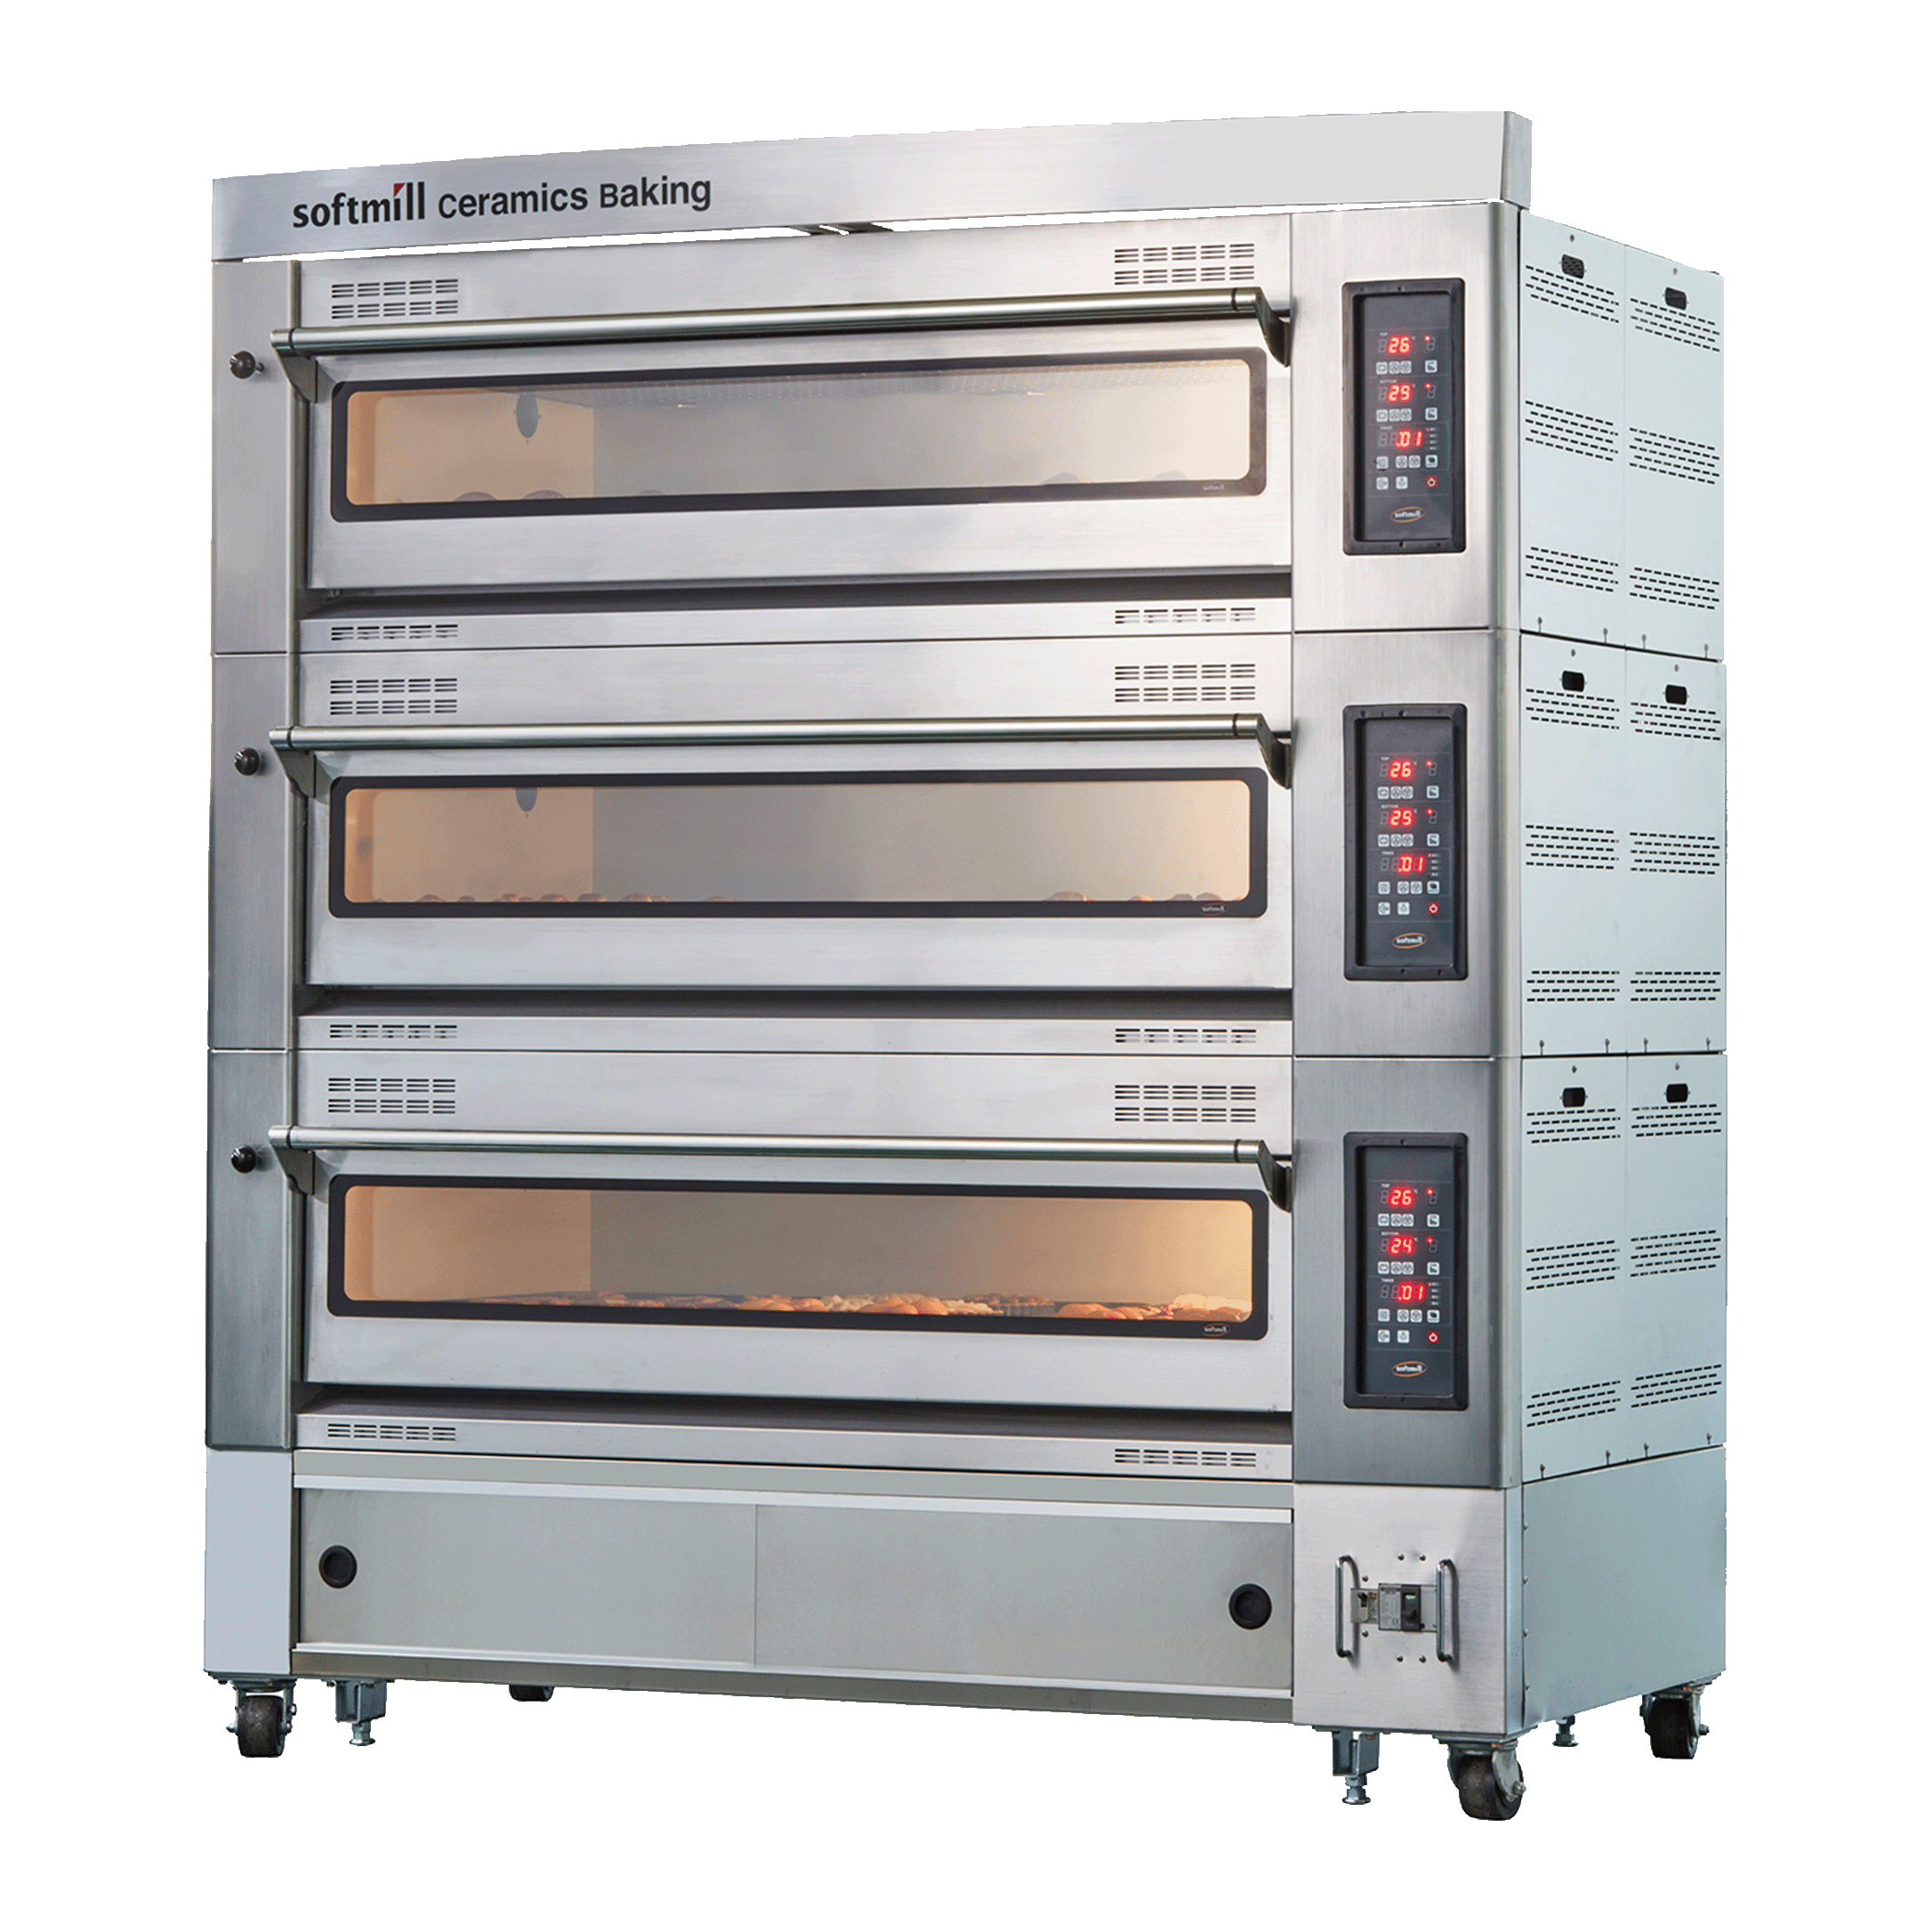 Deck Oven 4 trays 3 tiers detail page link